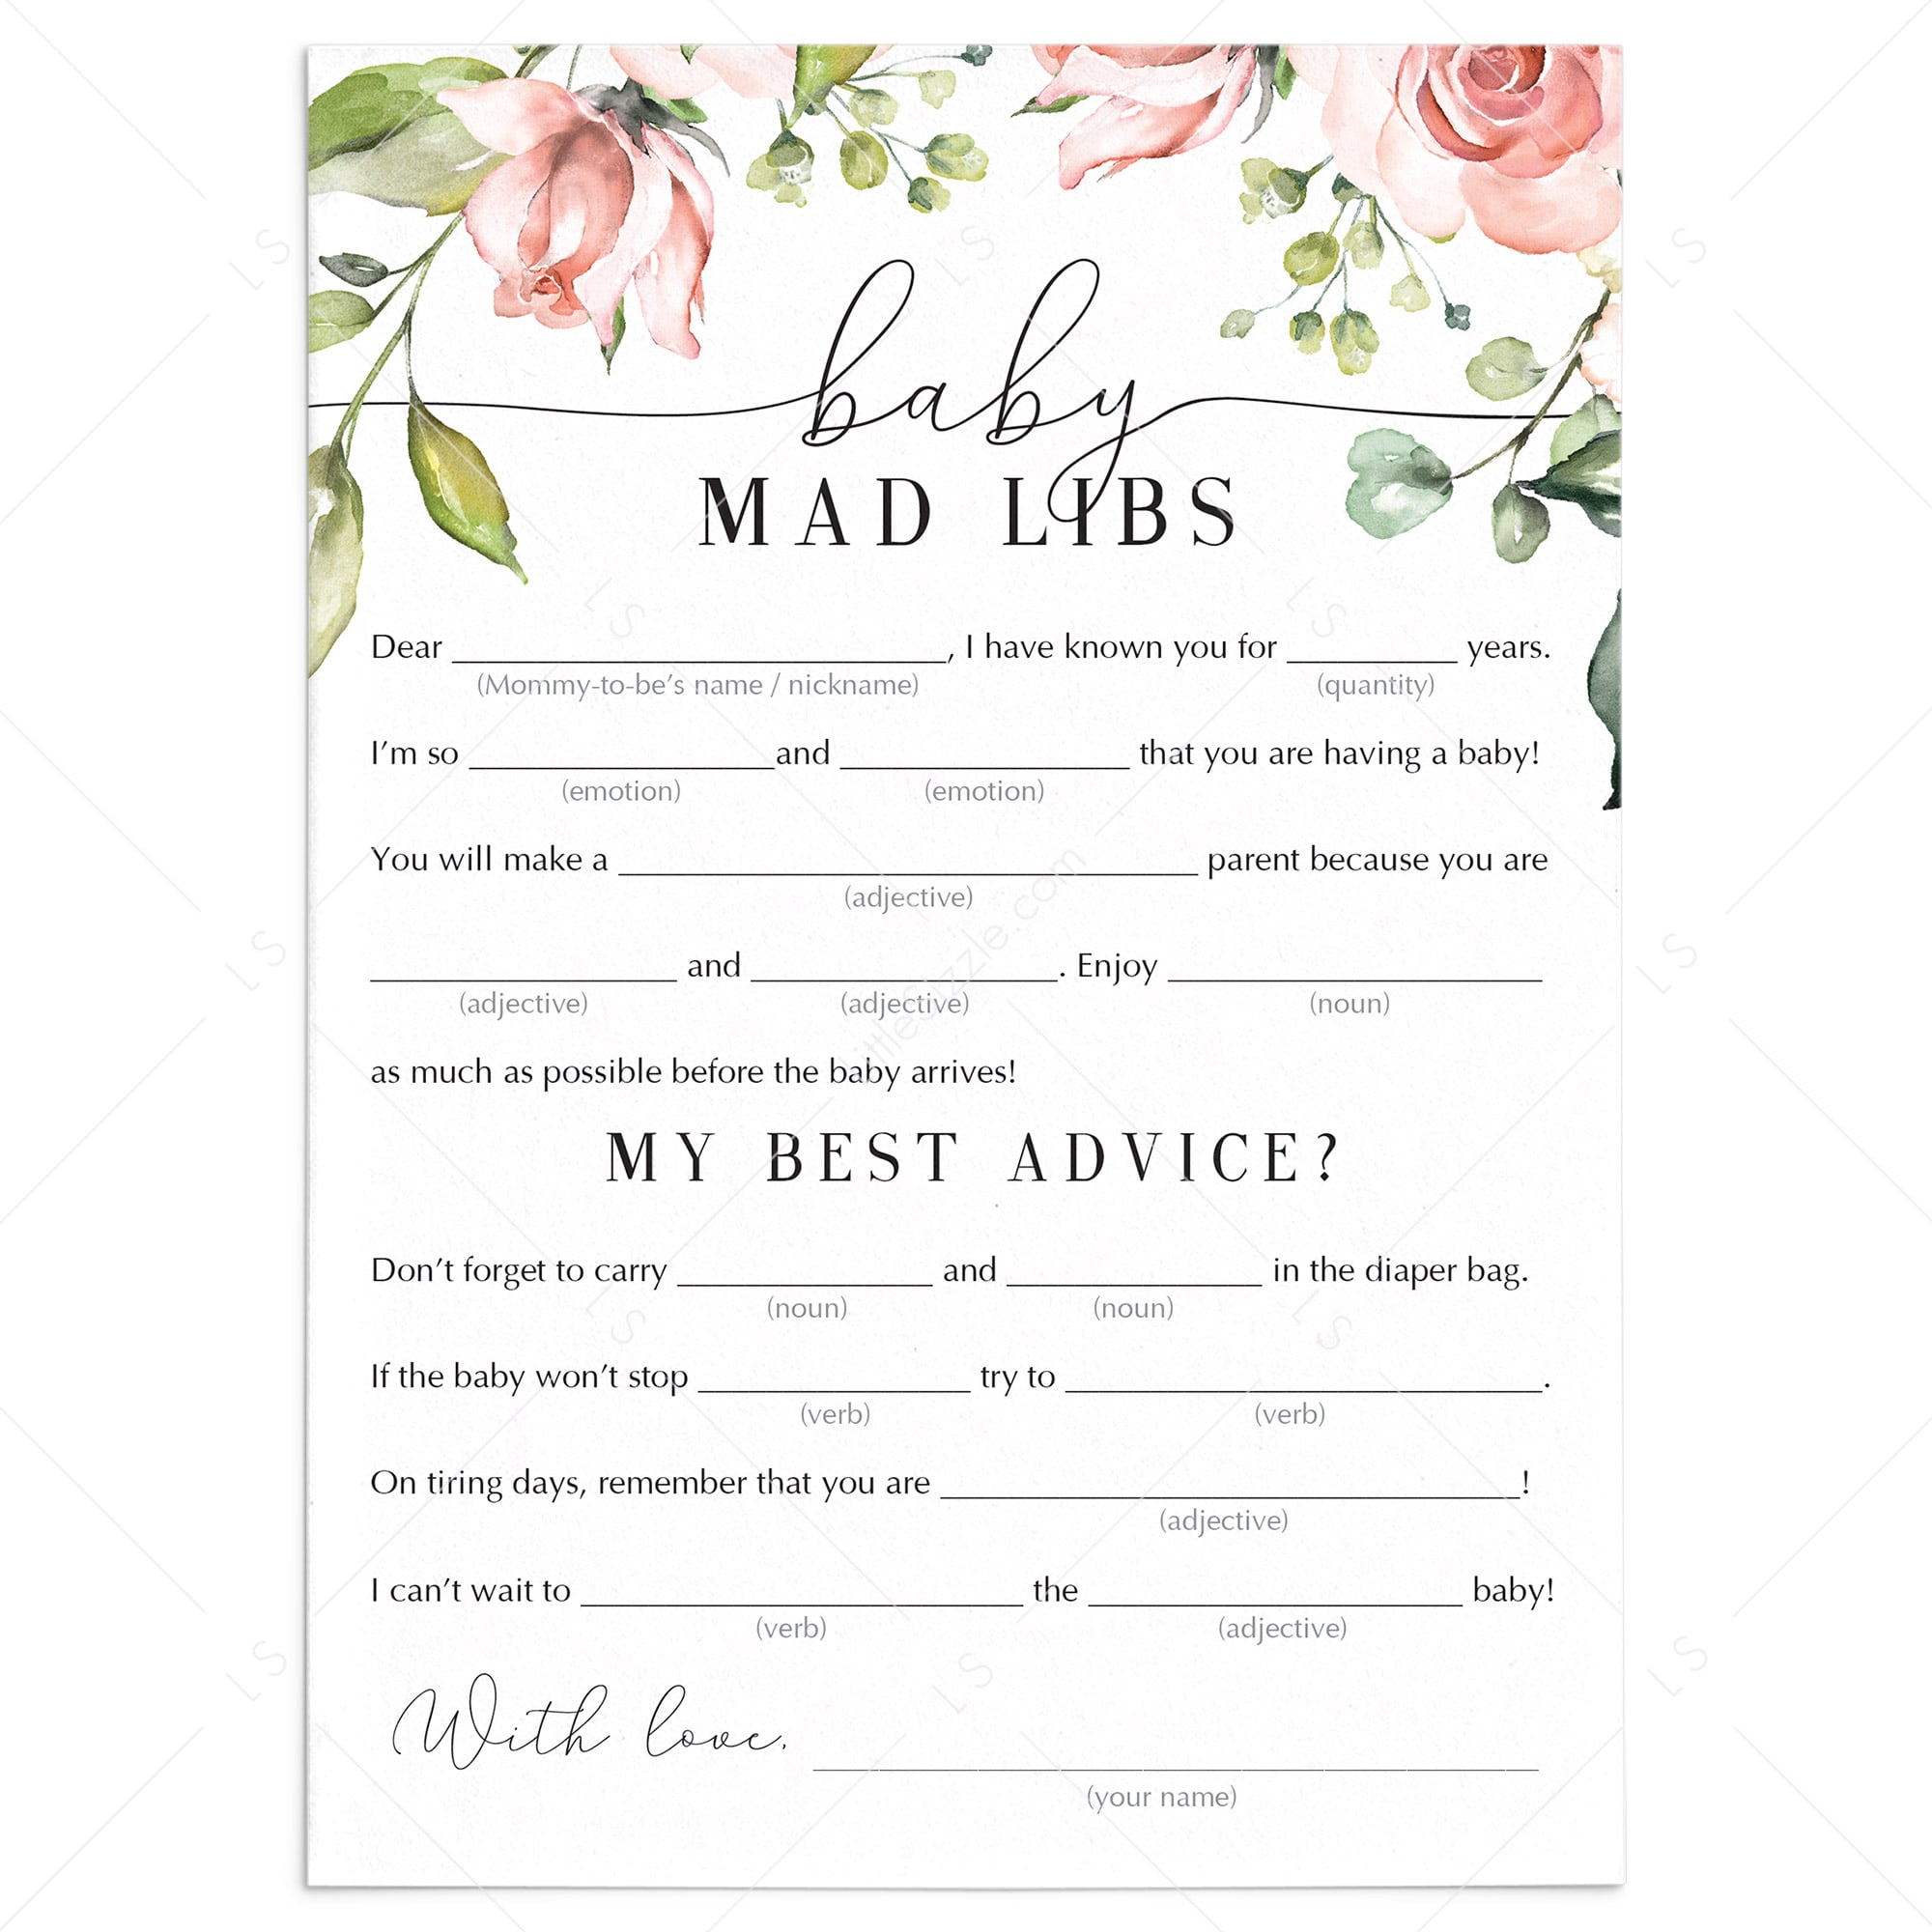 Floral baby shower advice cards baby mad libs printable by LittleSizzle